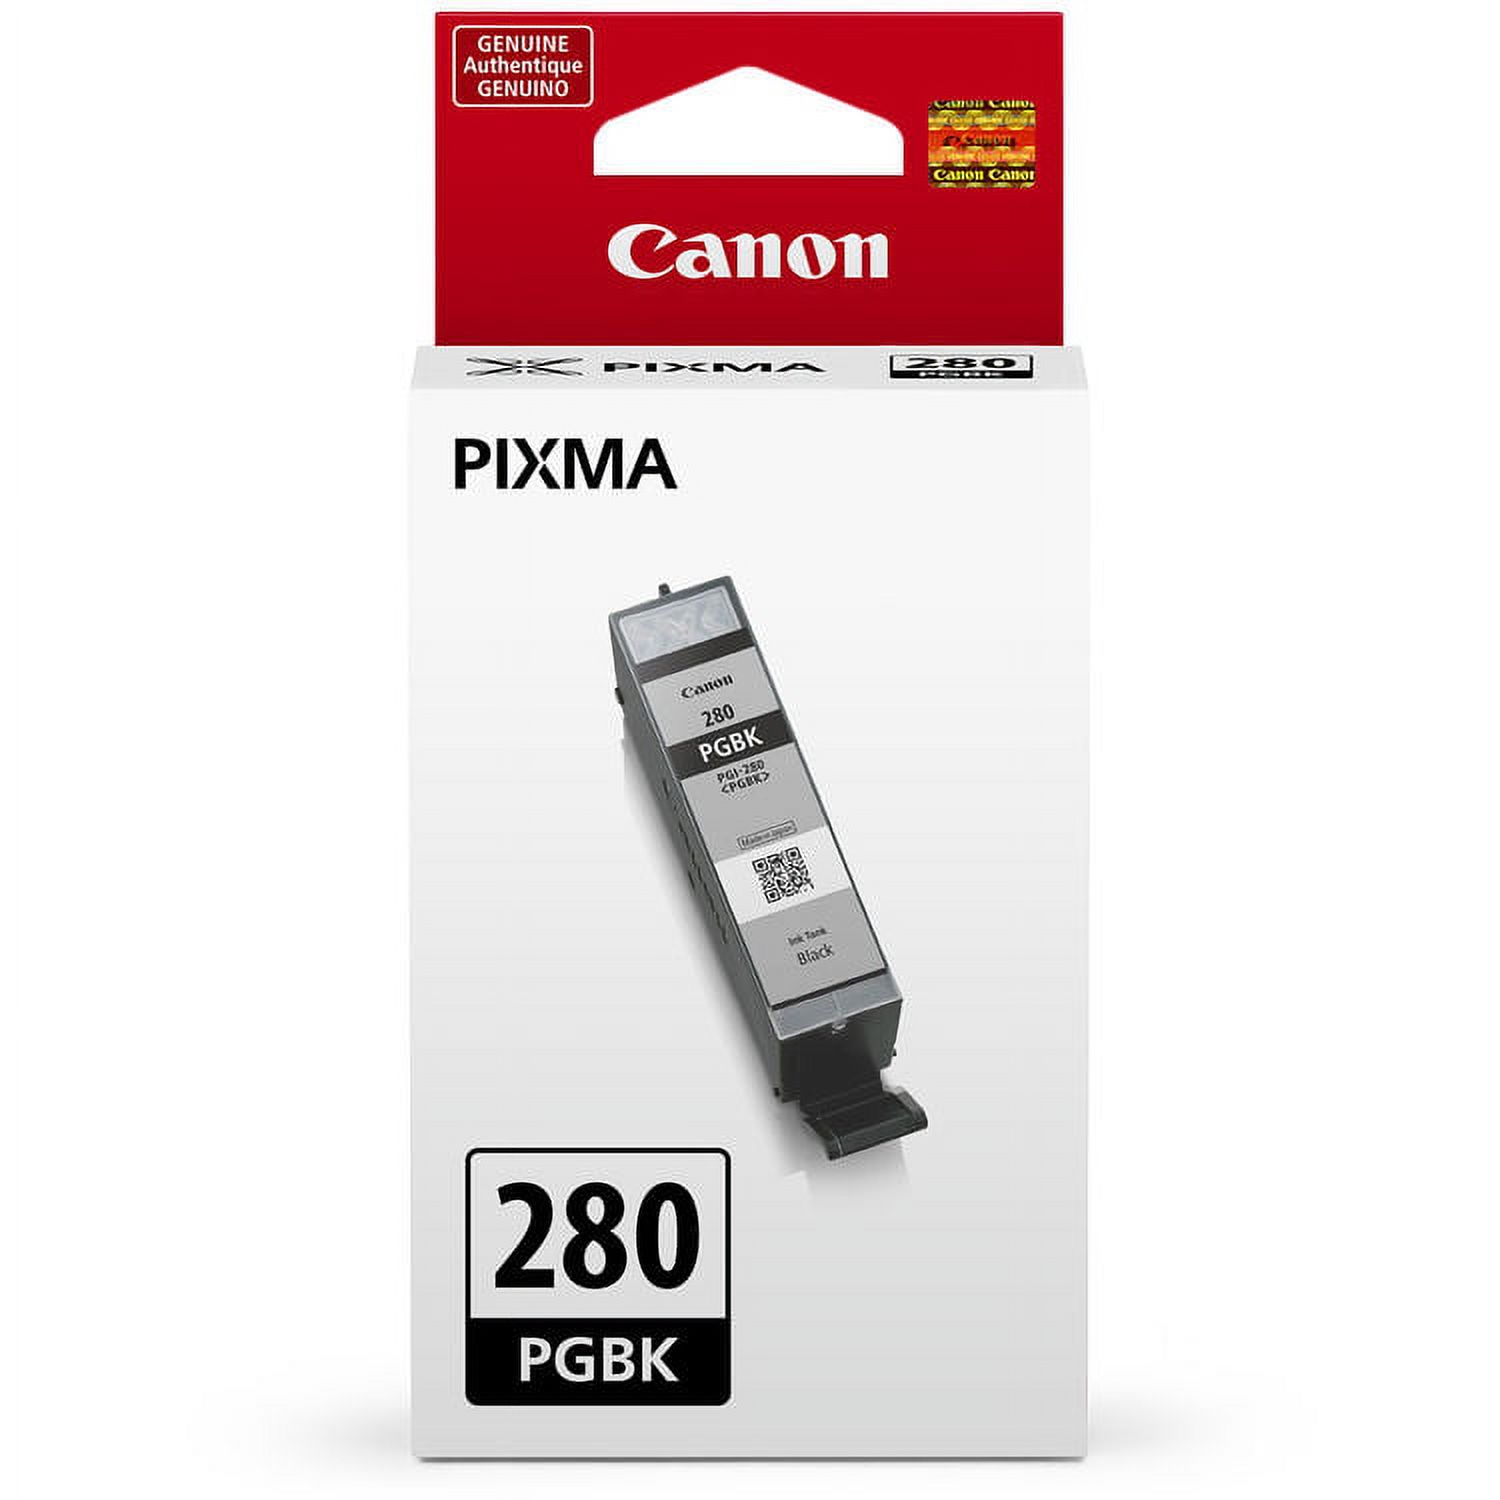 Genuine Canon CLI-281 5-Color Ink Tank Combo Pack with 5 x 5 Photo Paper (2091C006) + Canon PGI-280 Pigment Black Ink Tank (2075C001) - image 2 of 3